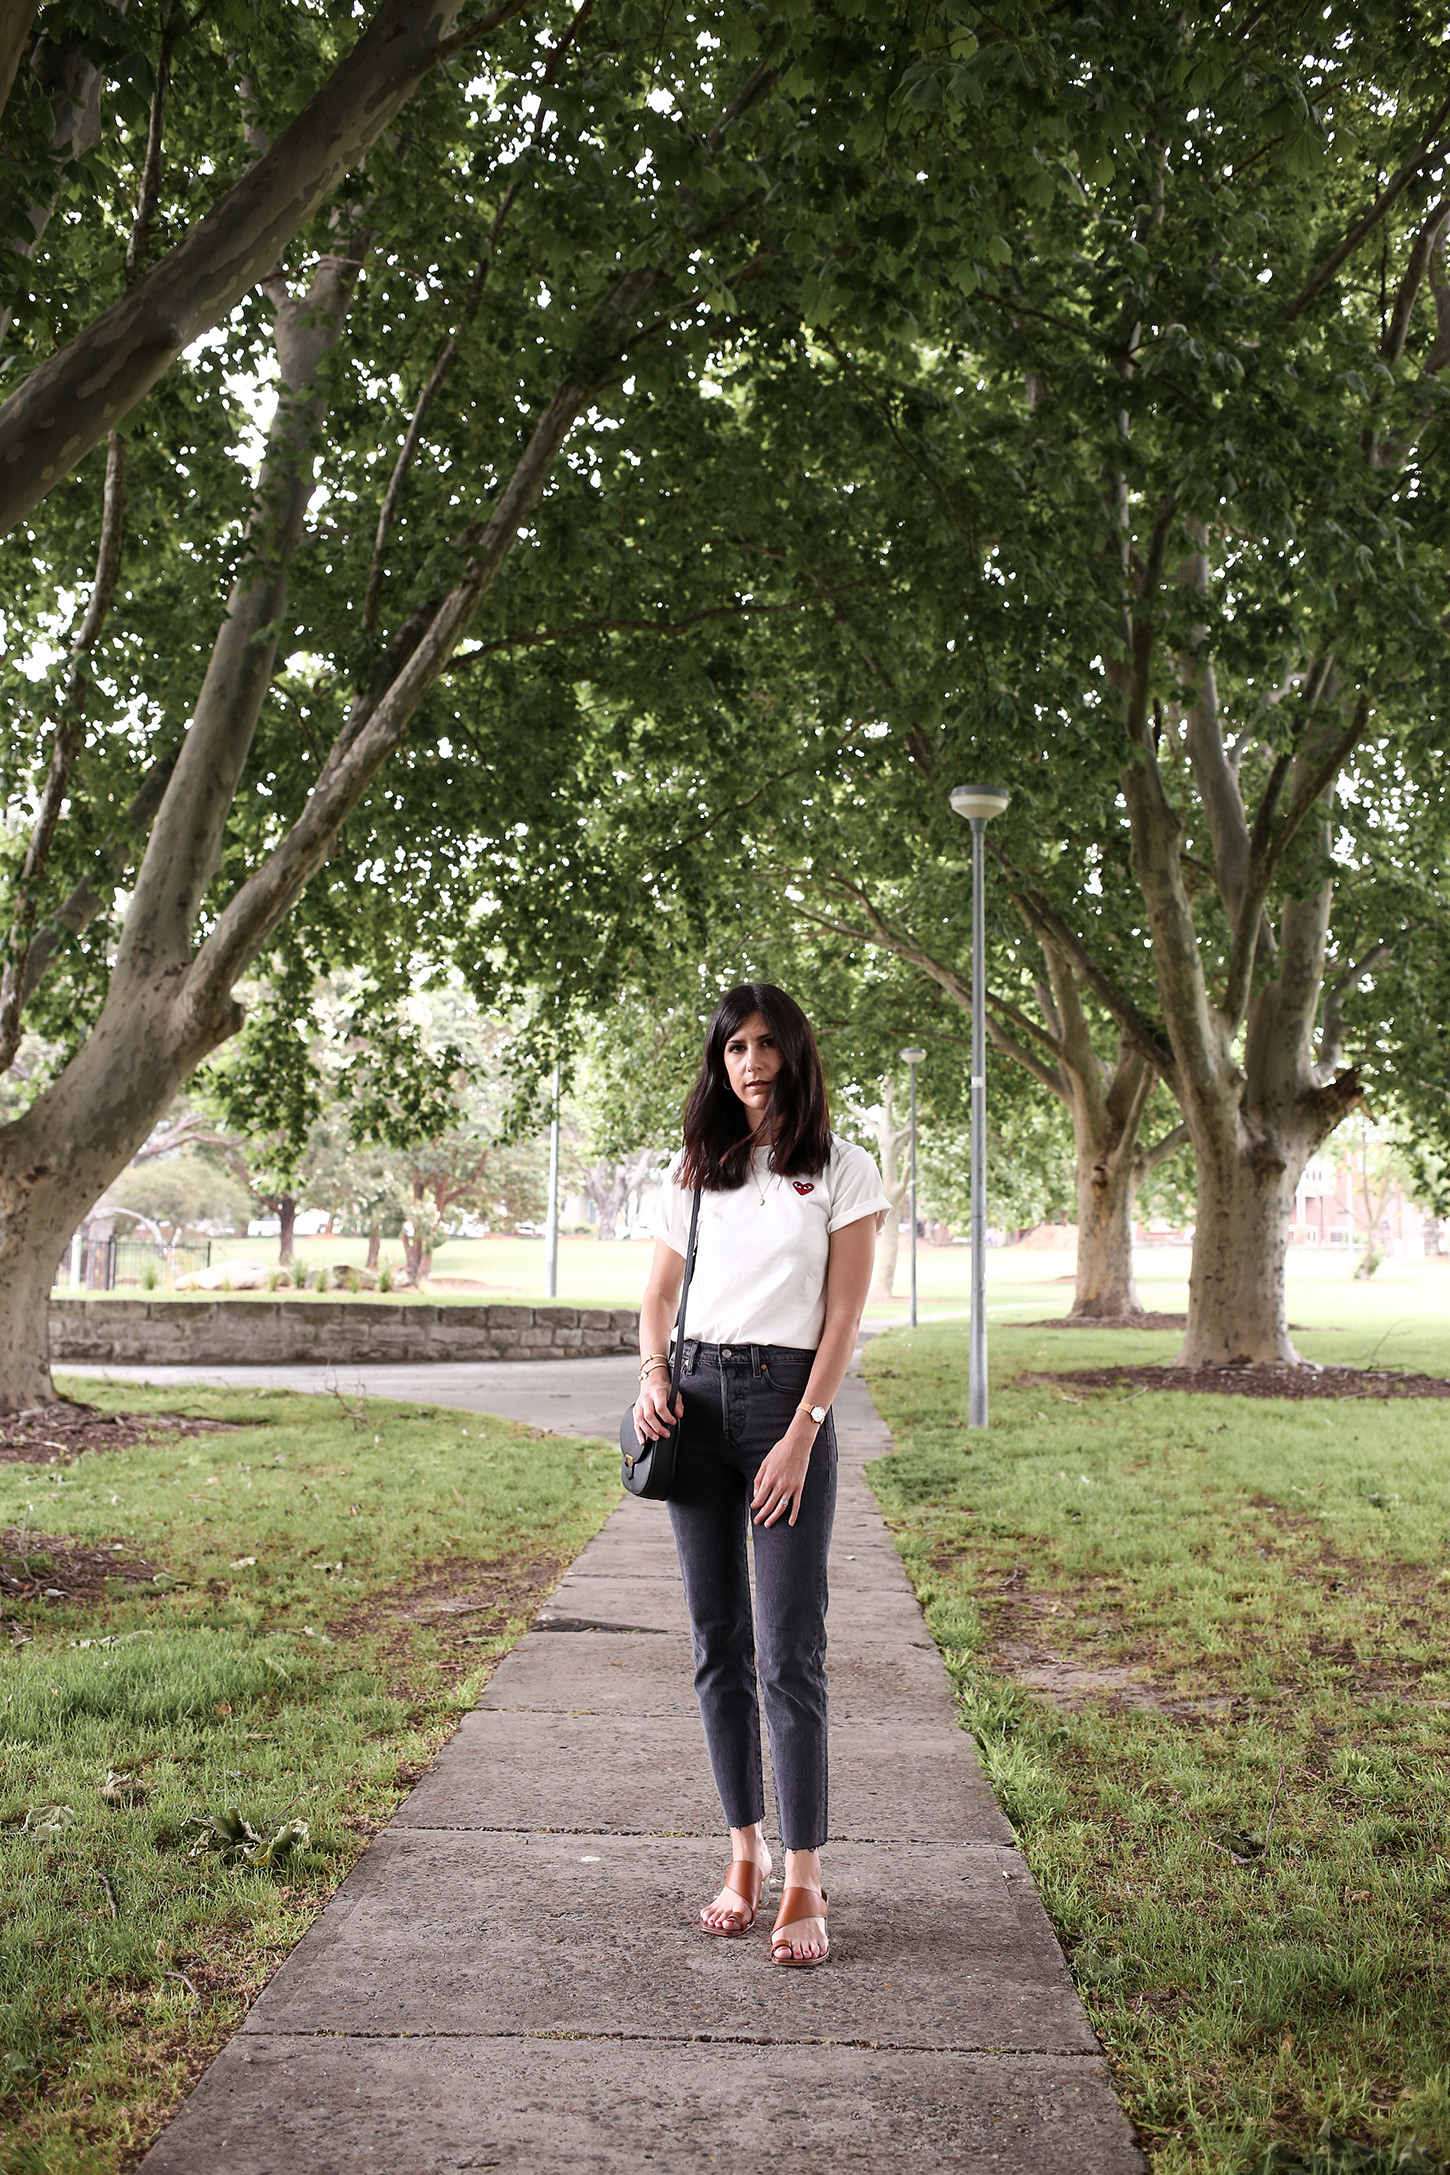 Wearing Lately: White Tee and Faded Black Denim